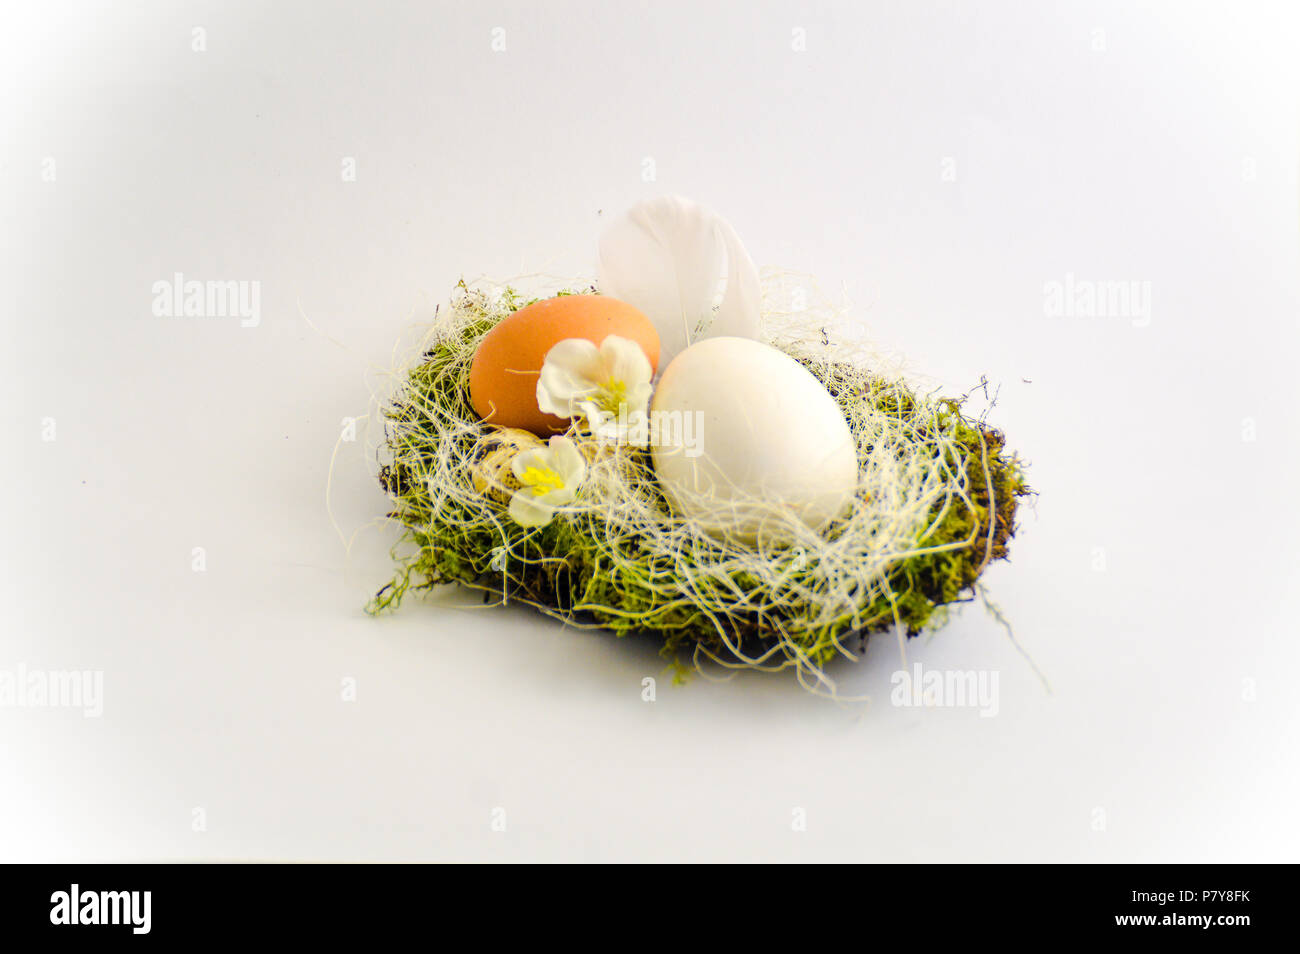 Beautiful nest with two eggs against a white background shows the symbol of Spring, Easter, growth and rebirth Stock Photo